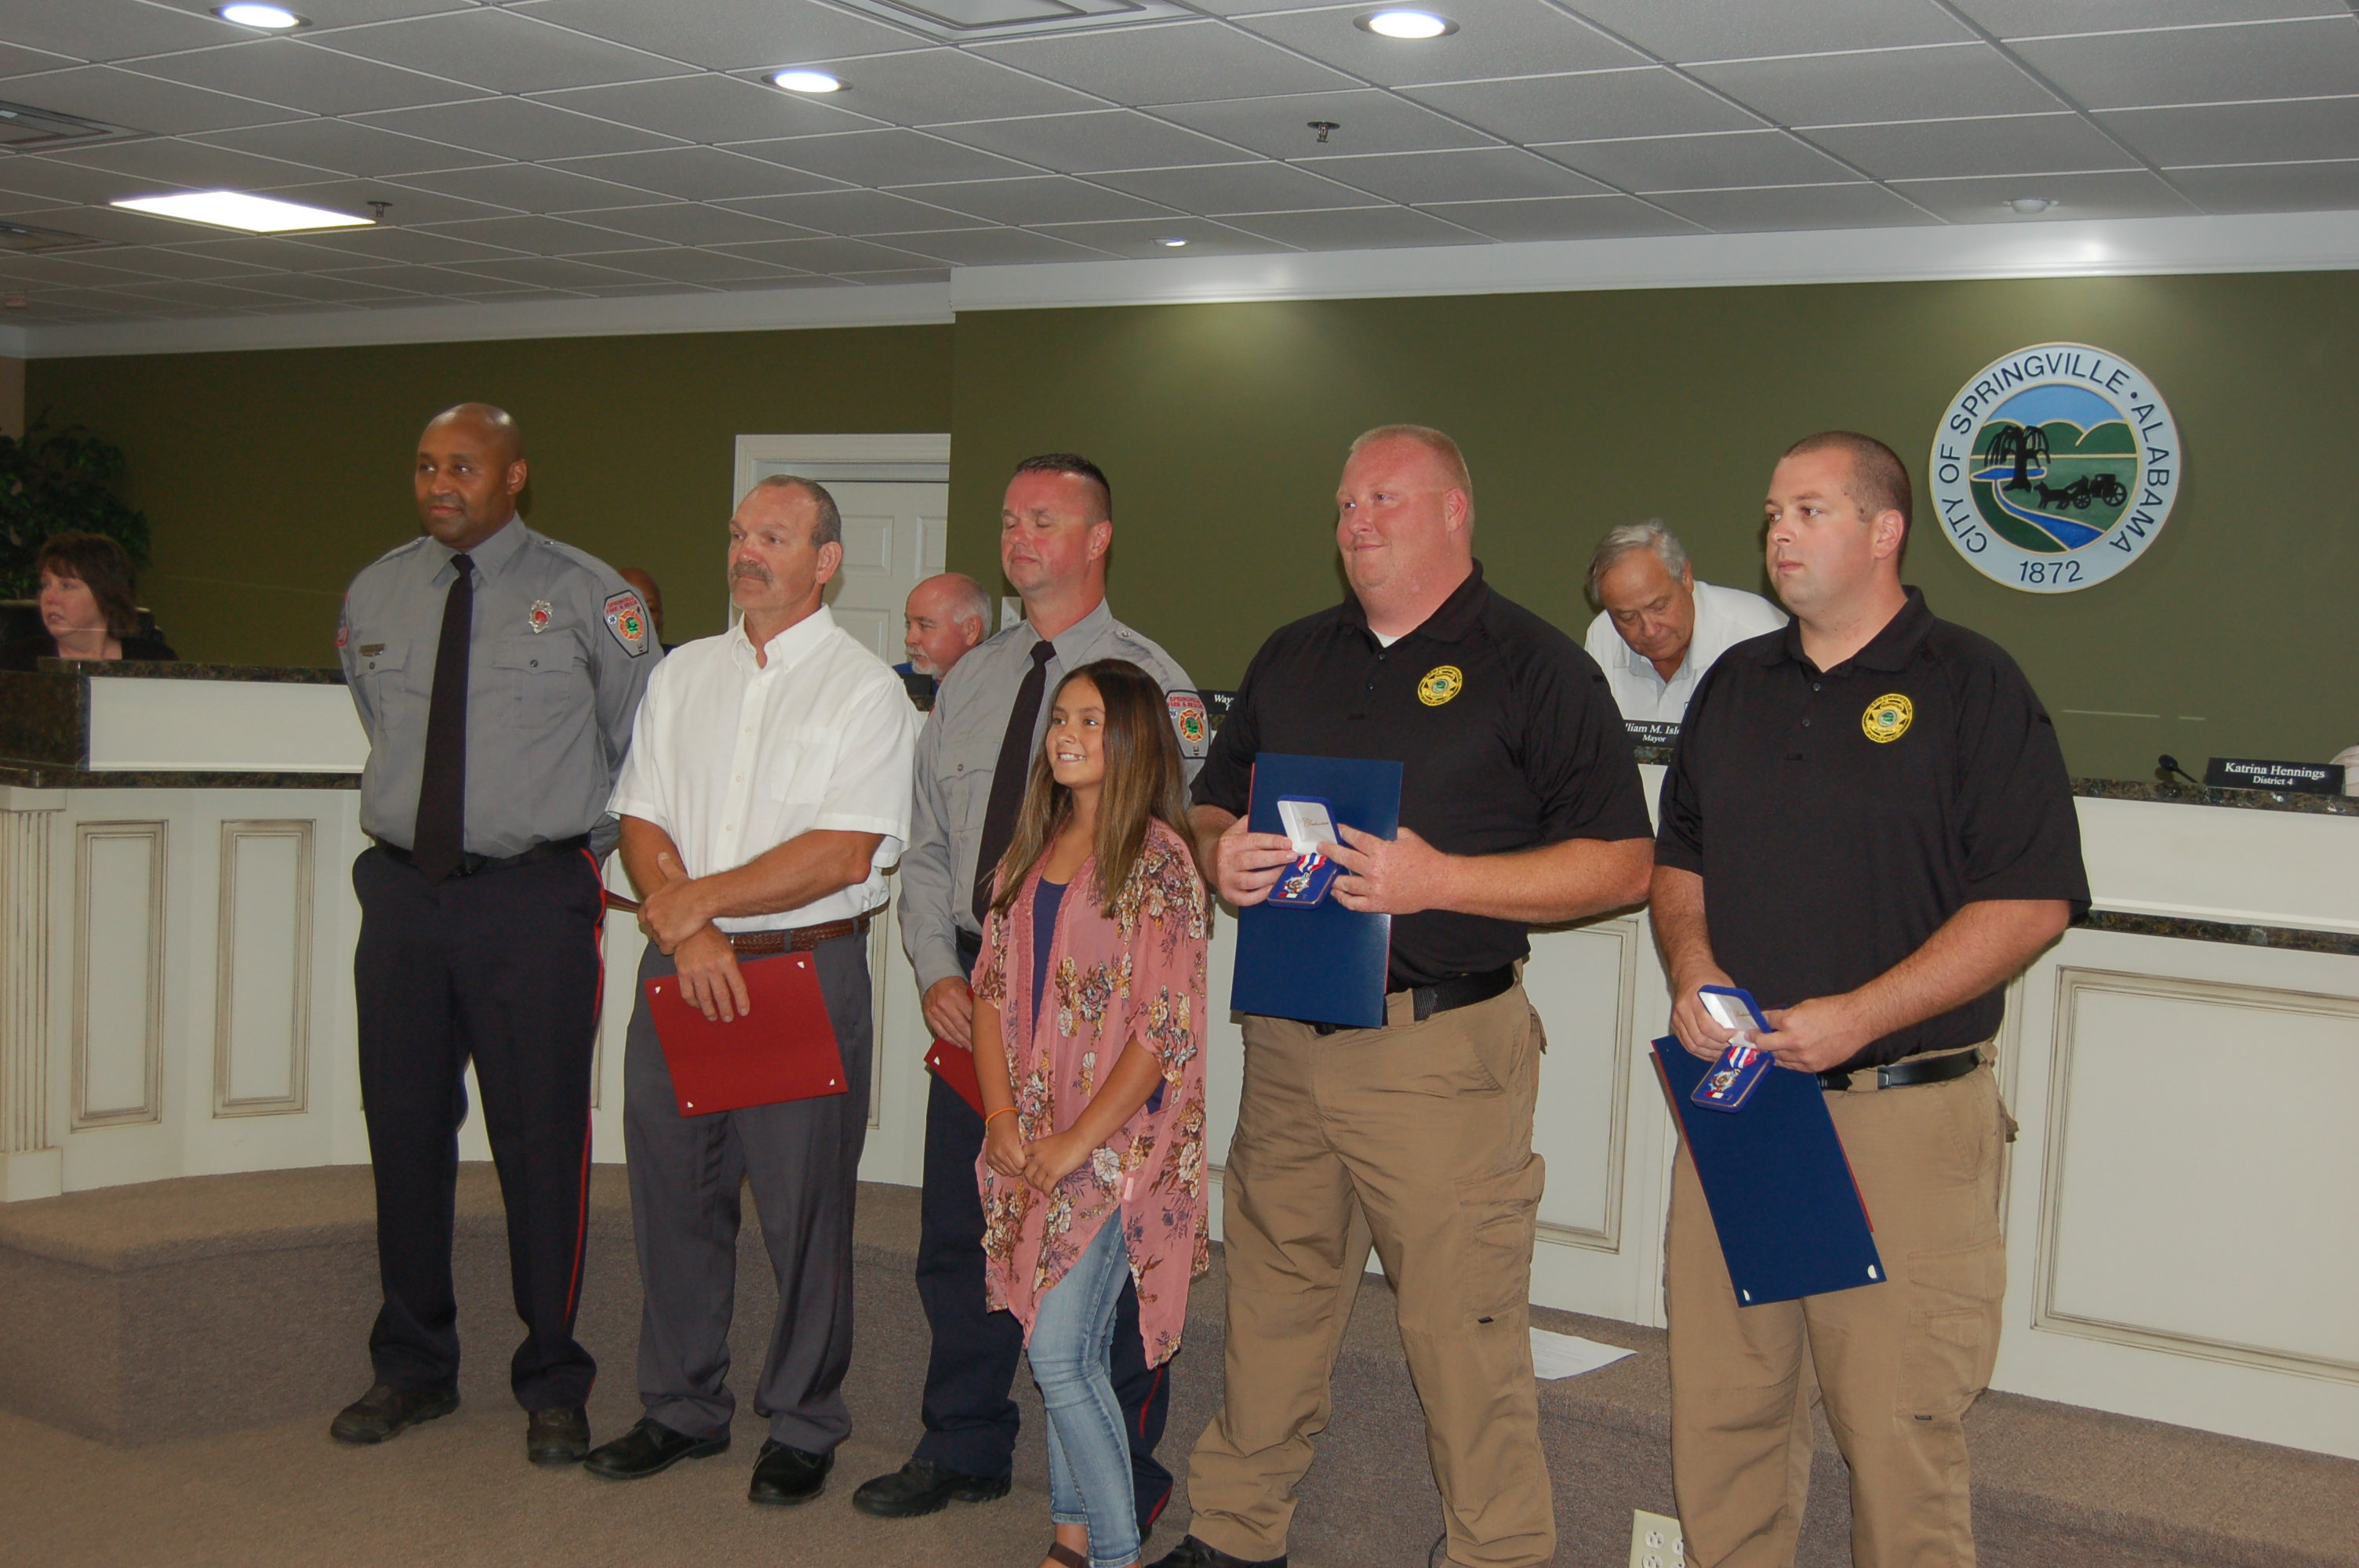 Police, firefighters who saved girl in May commended at Springville Council meeting